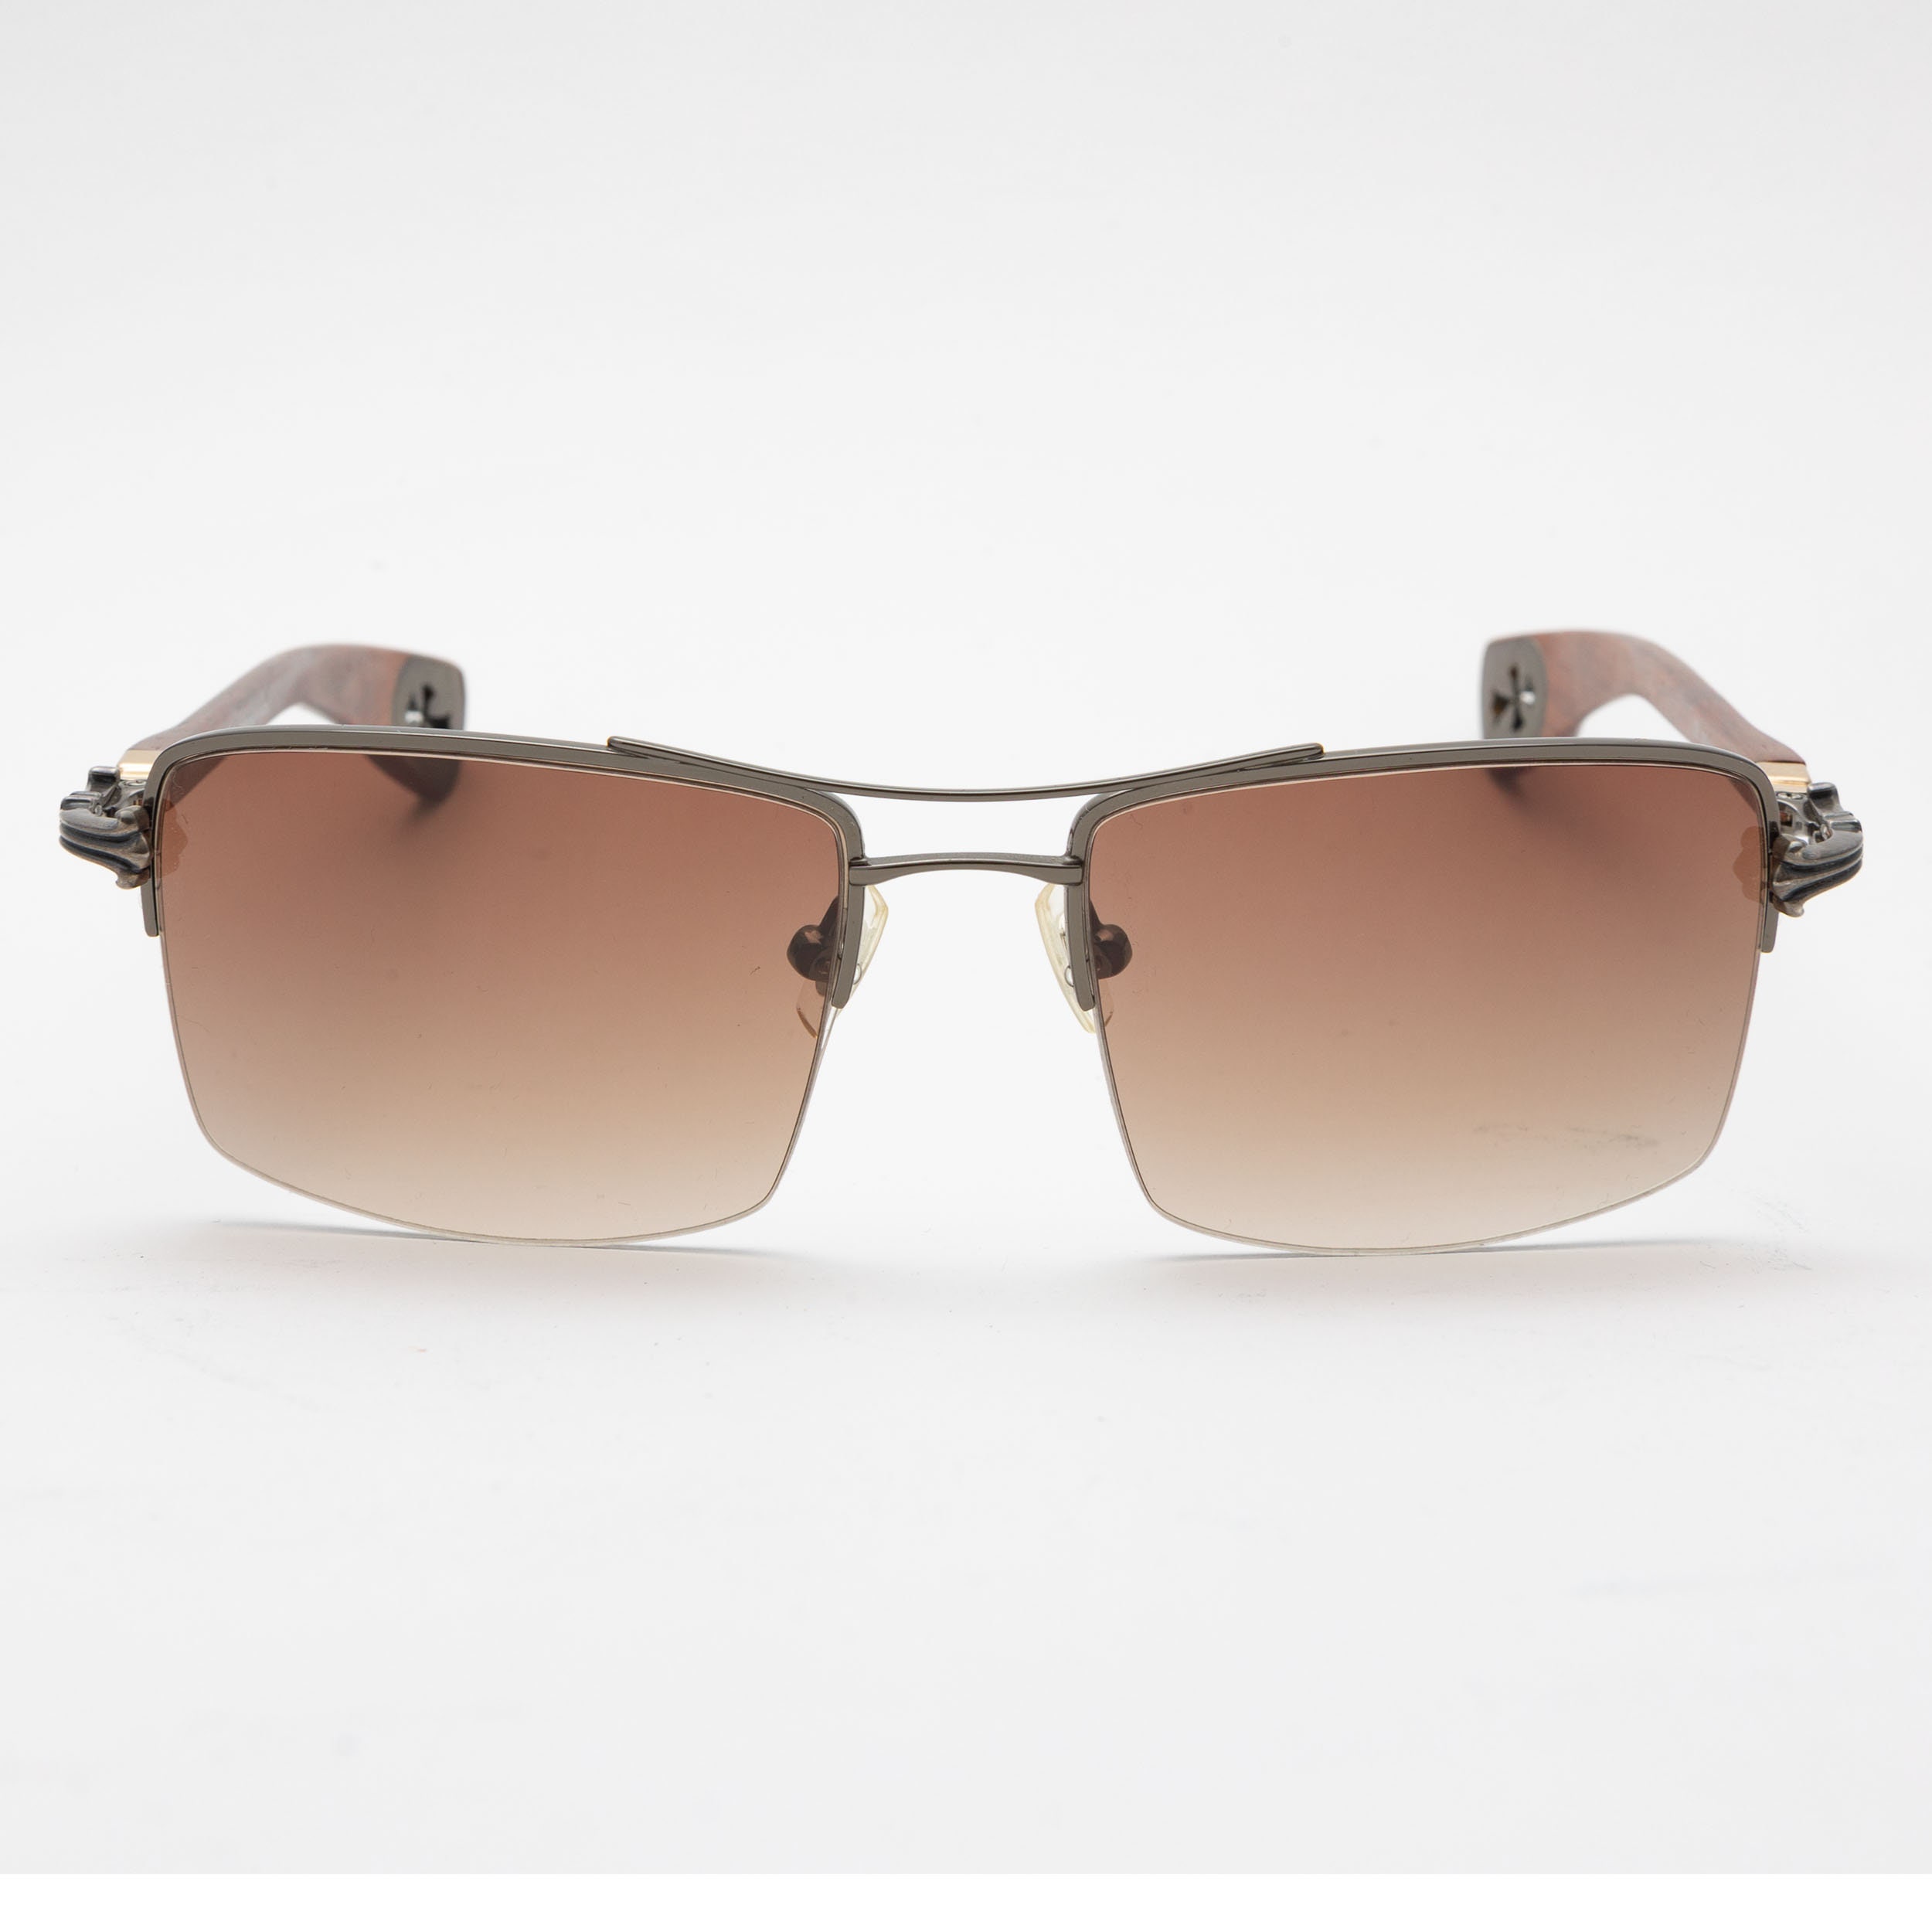 Buy Chrome Hearts Sunglasses Online In India - Etsy India